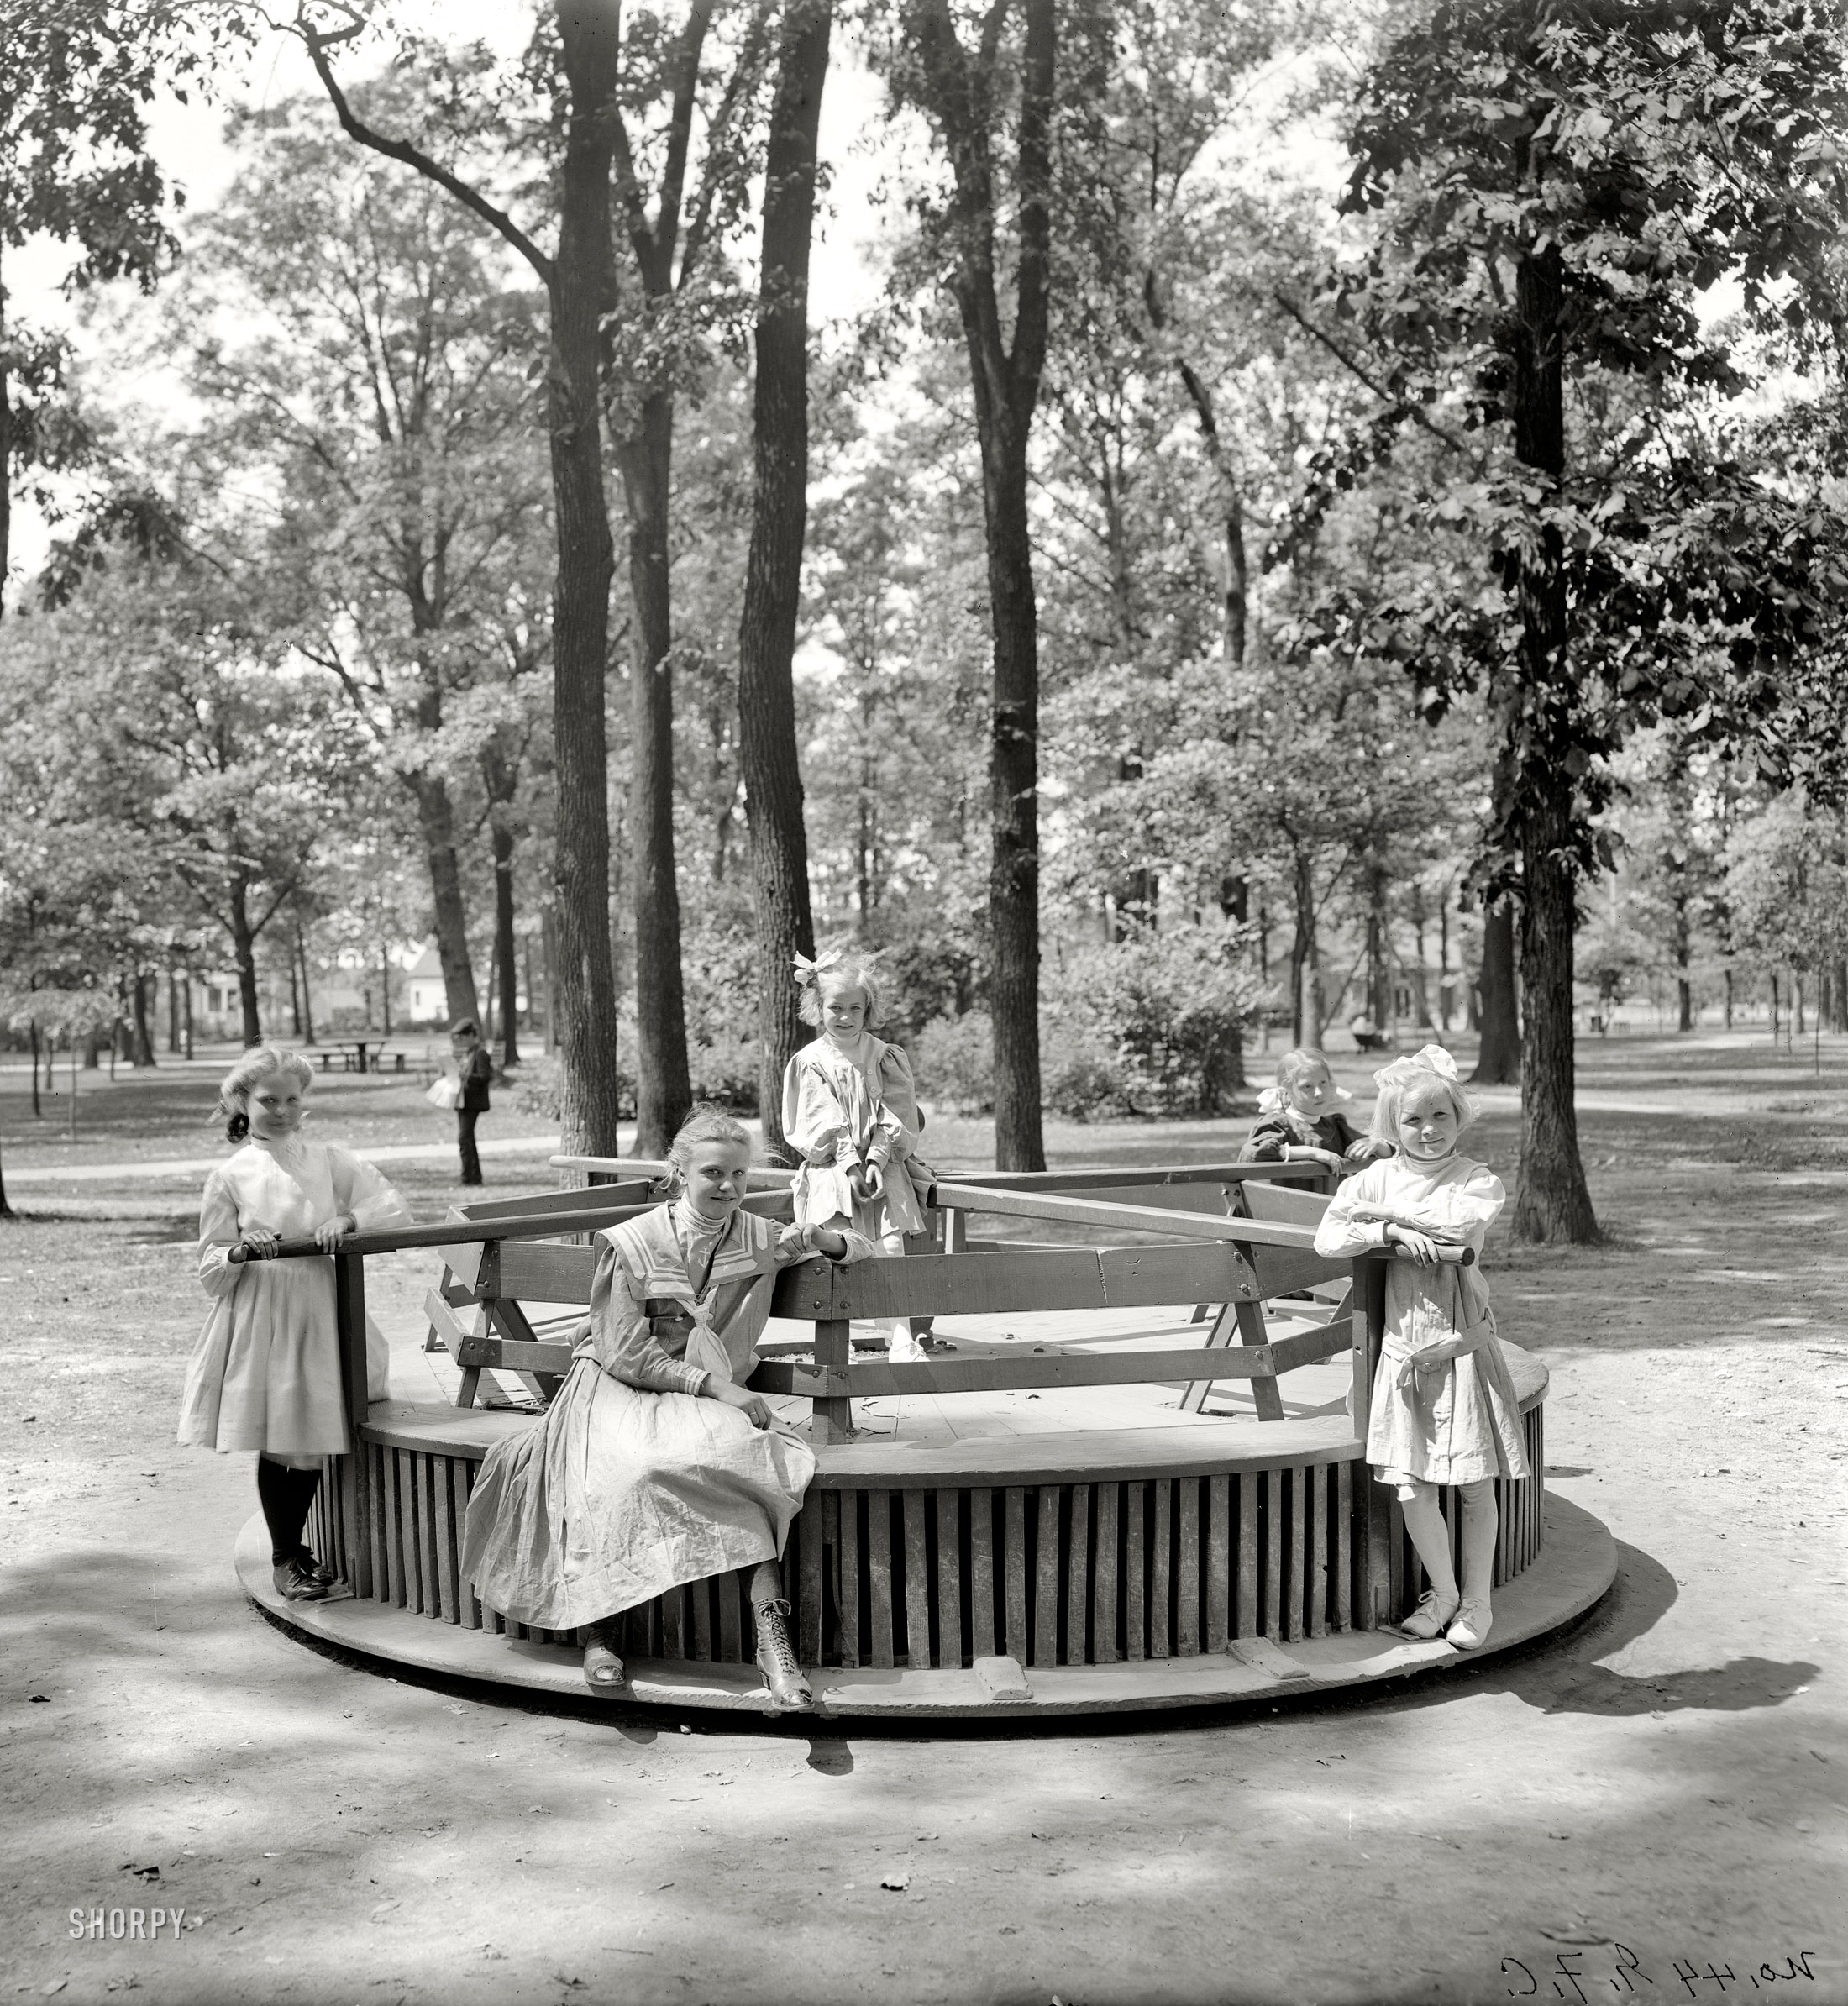 Detroit, Michigan, circa 1900. "Merry-go-round in Clark Park." 8x10 inch (cropped) dry plate glass negative, Detroit Publishing Company. View full size.